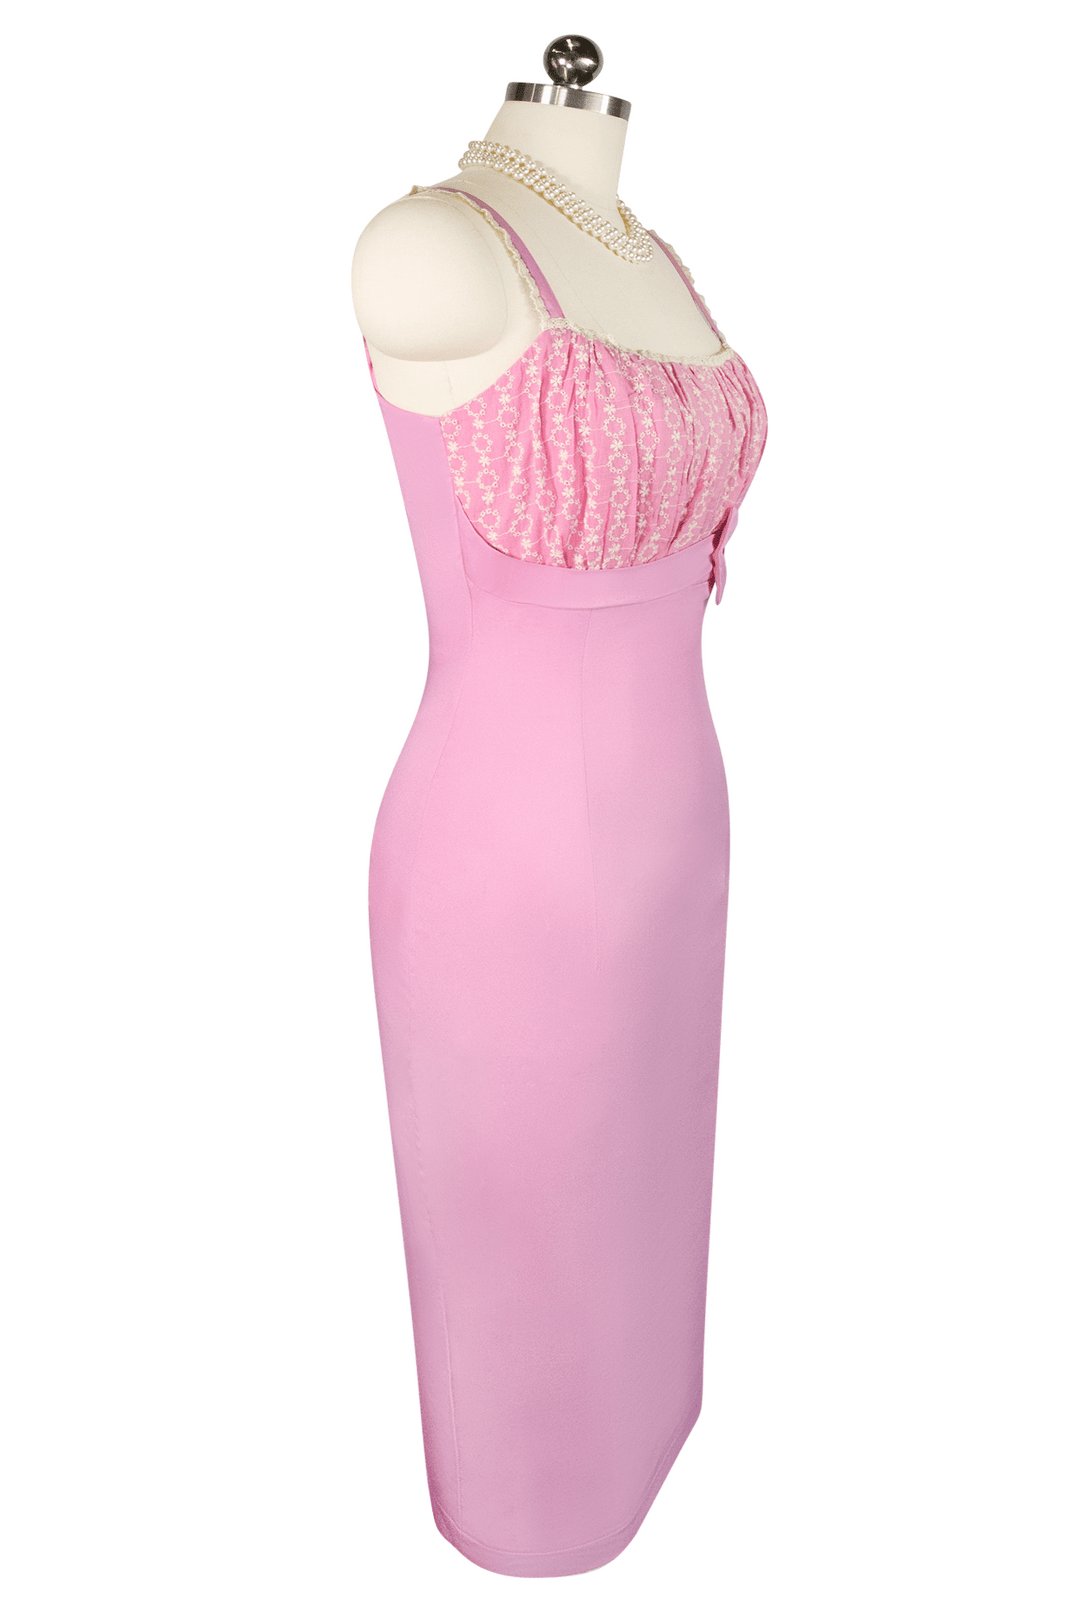 French Vacation Wiggle Dress - Kitten D'Amour